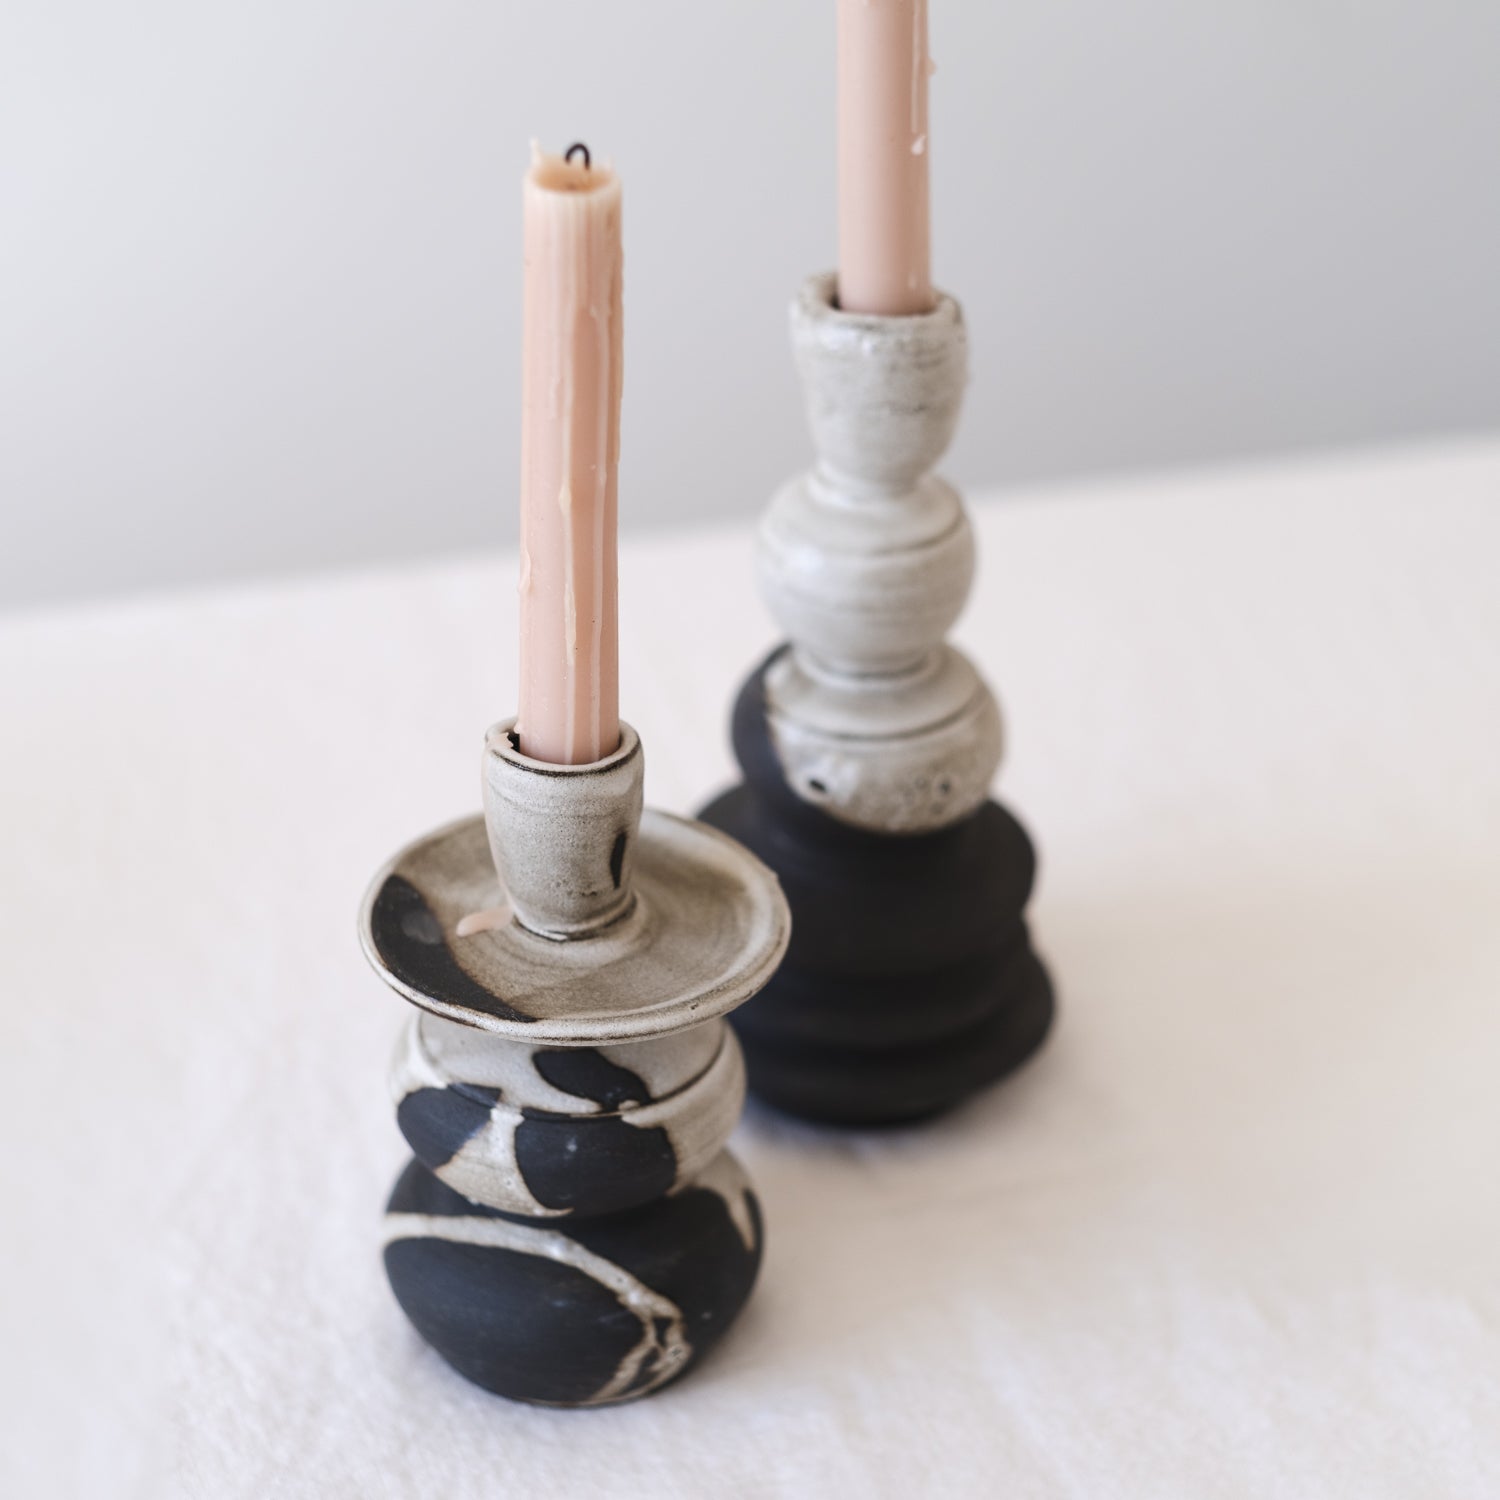 Small Handmade Ceramic Candle Holder in Black and White with a soft pink tapered candle